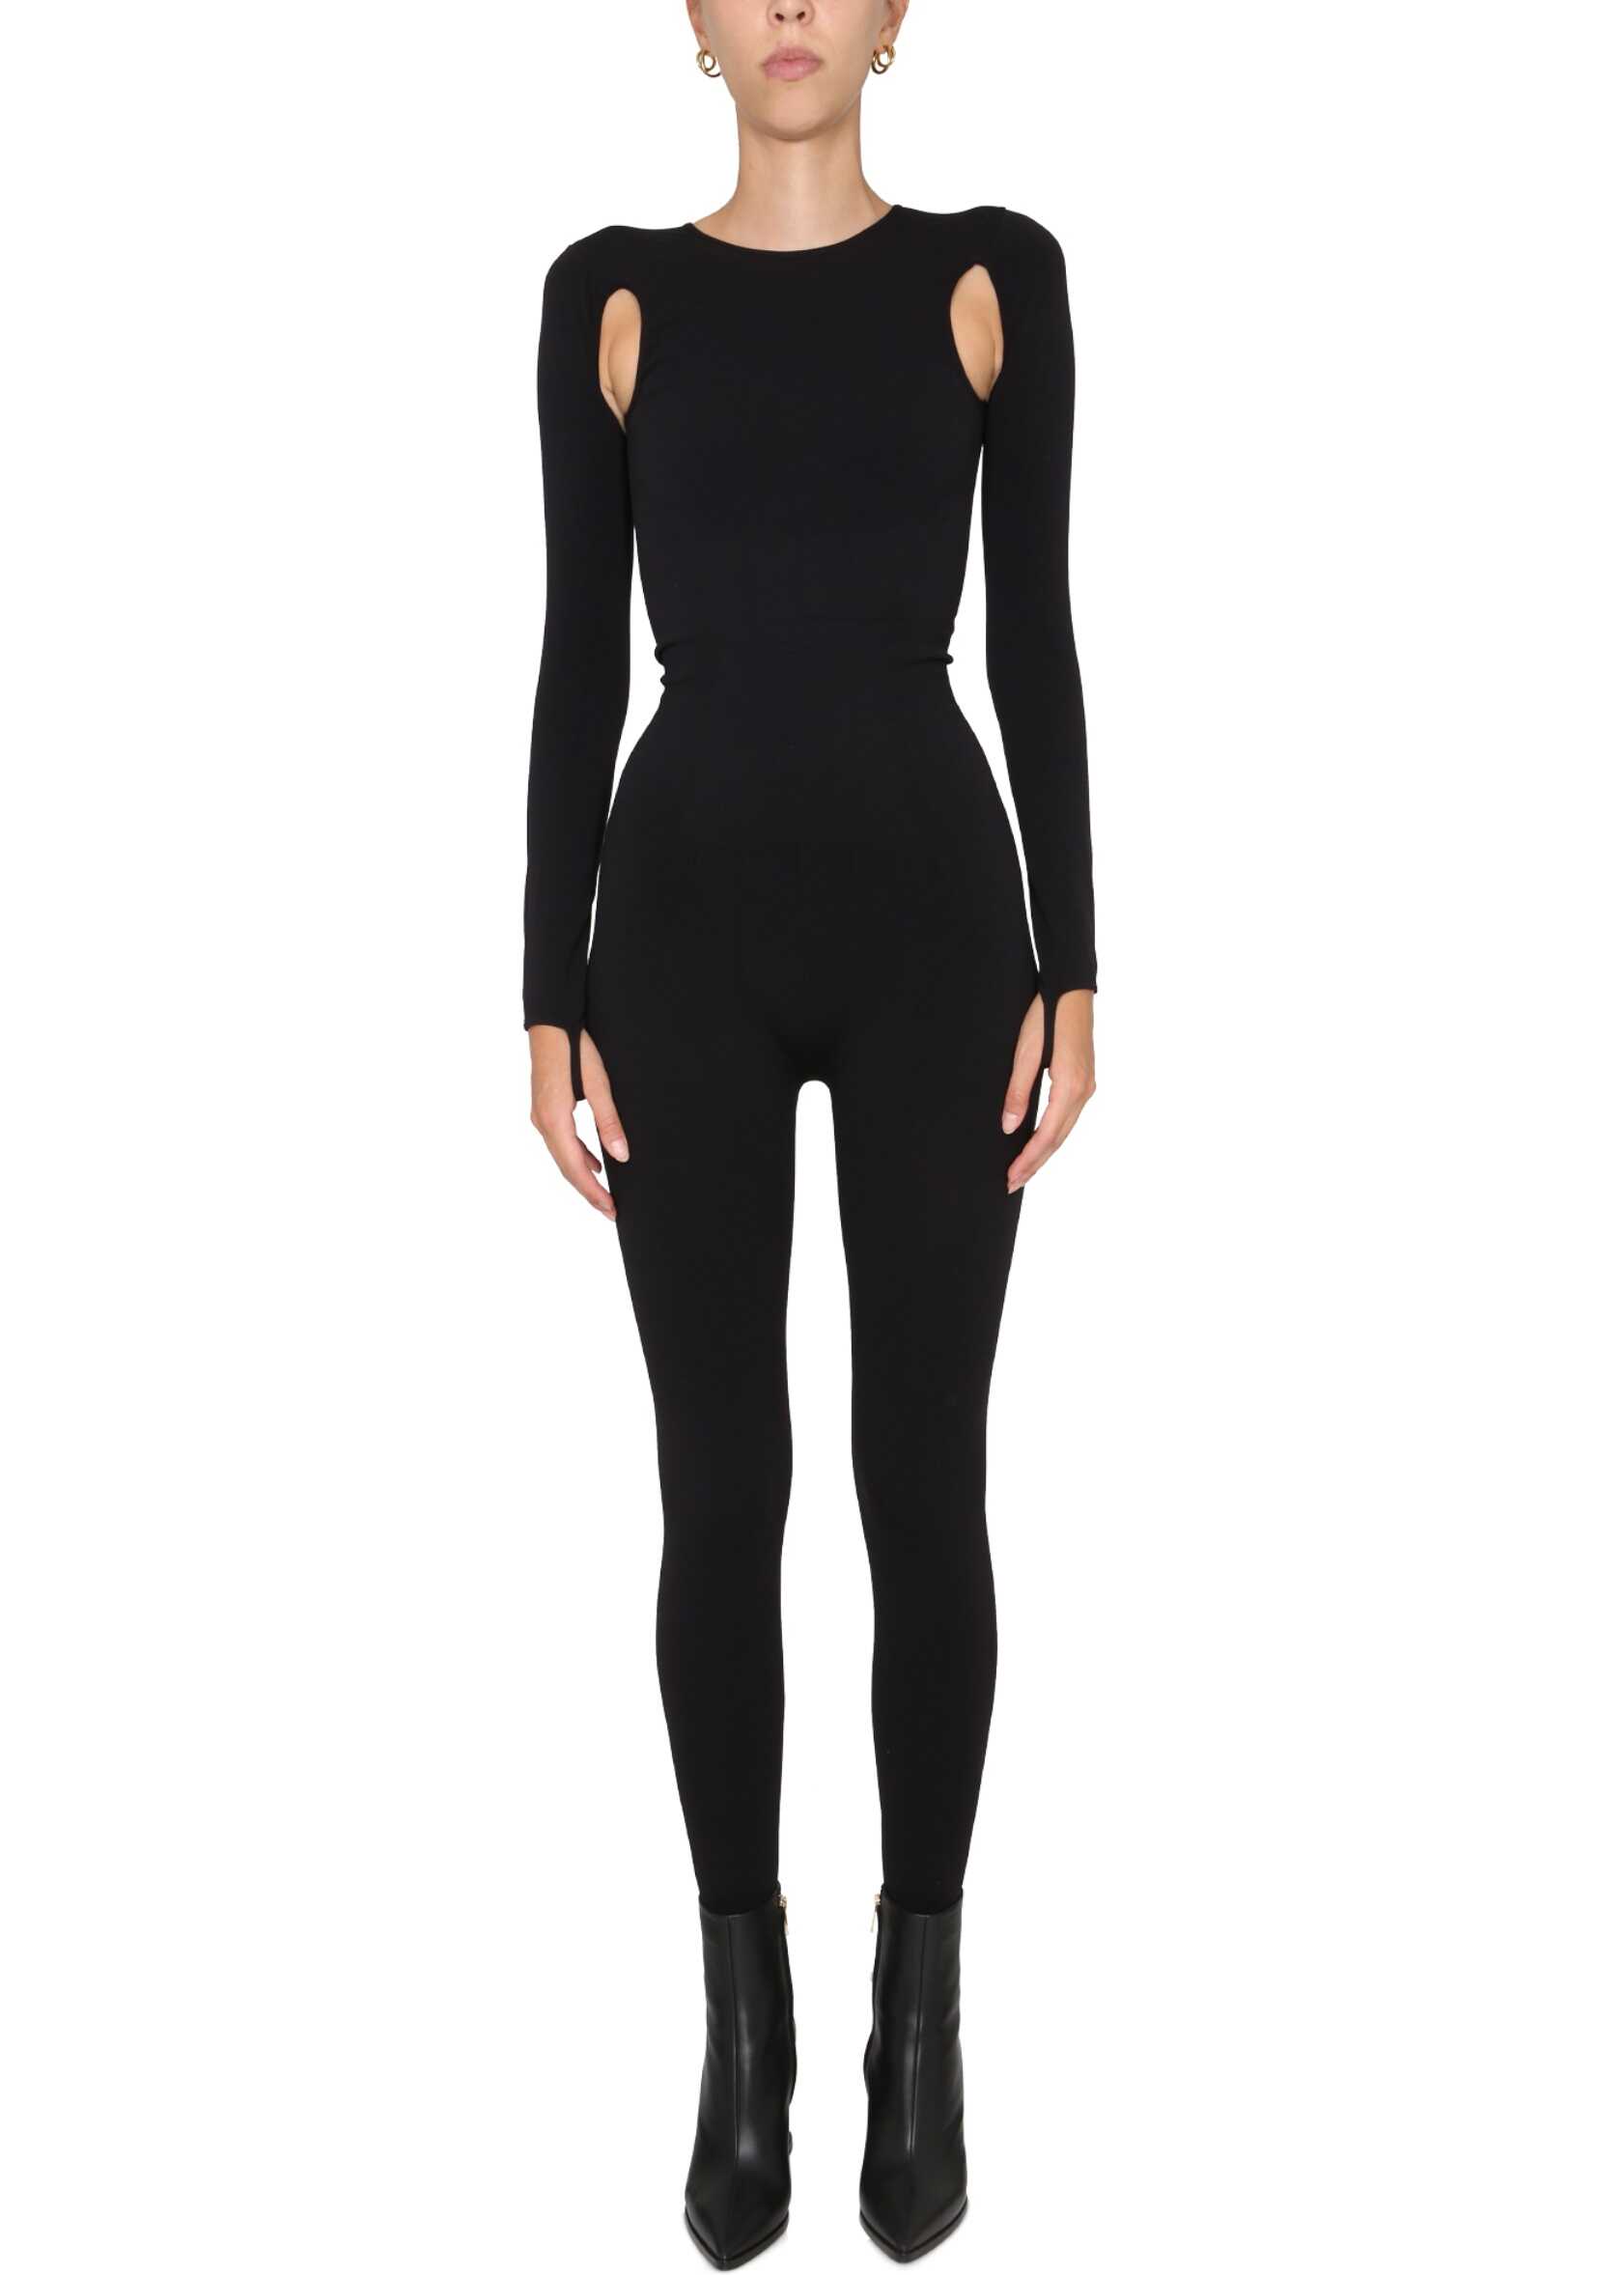 ANDREADAMO Full Jumpsuit With Cut-Out Details BLACK